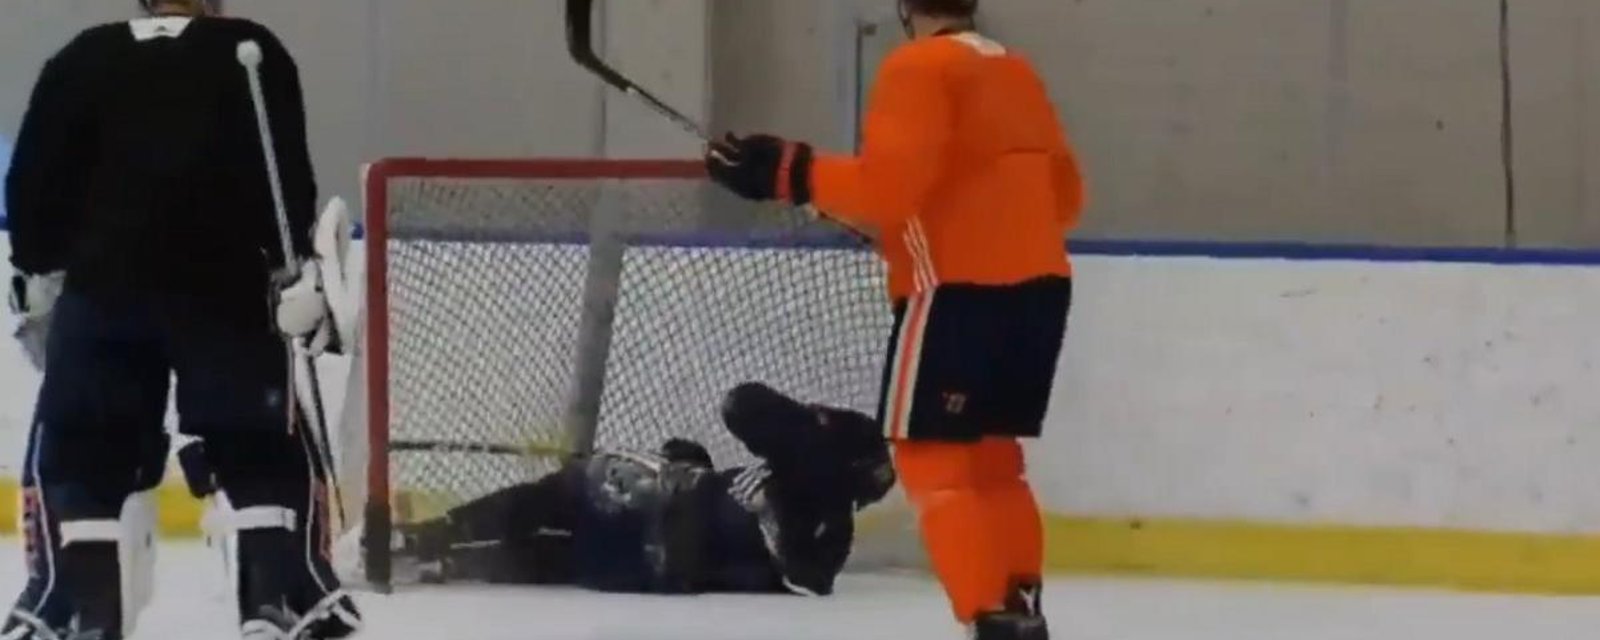 McDavid sent crashing into the net by his own teammate during practice.